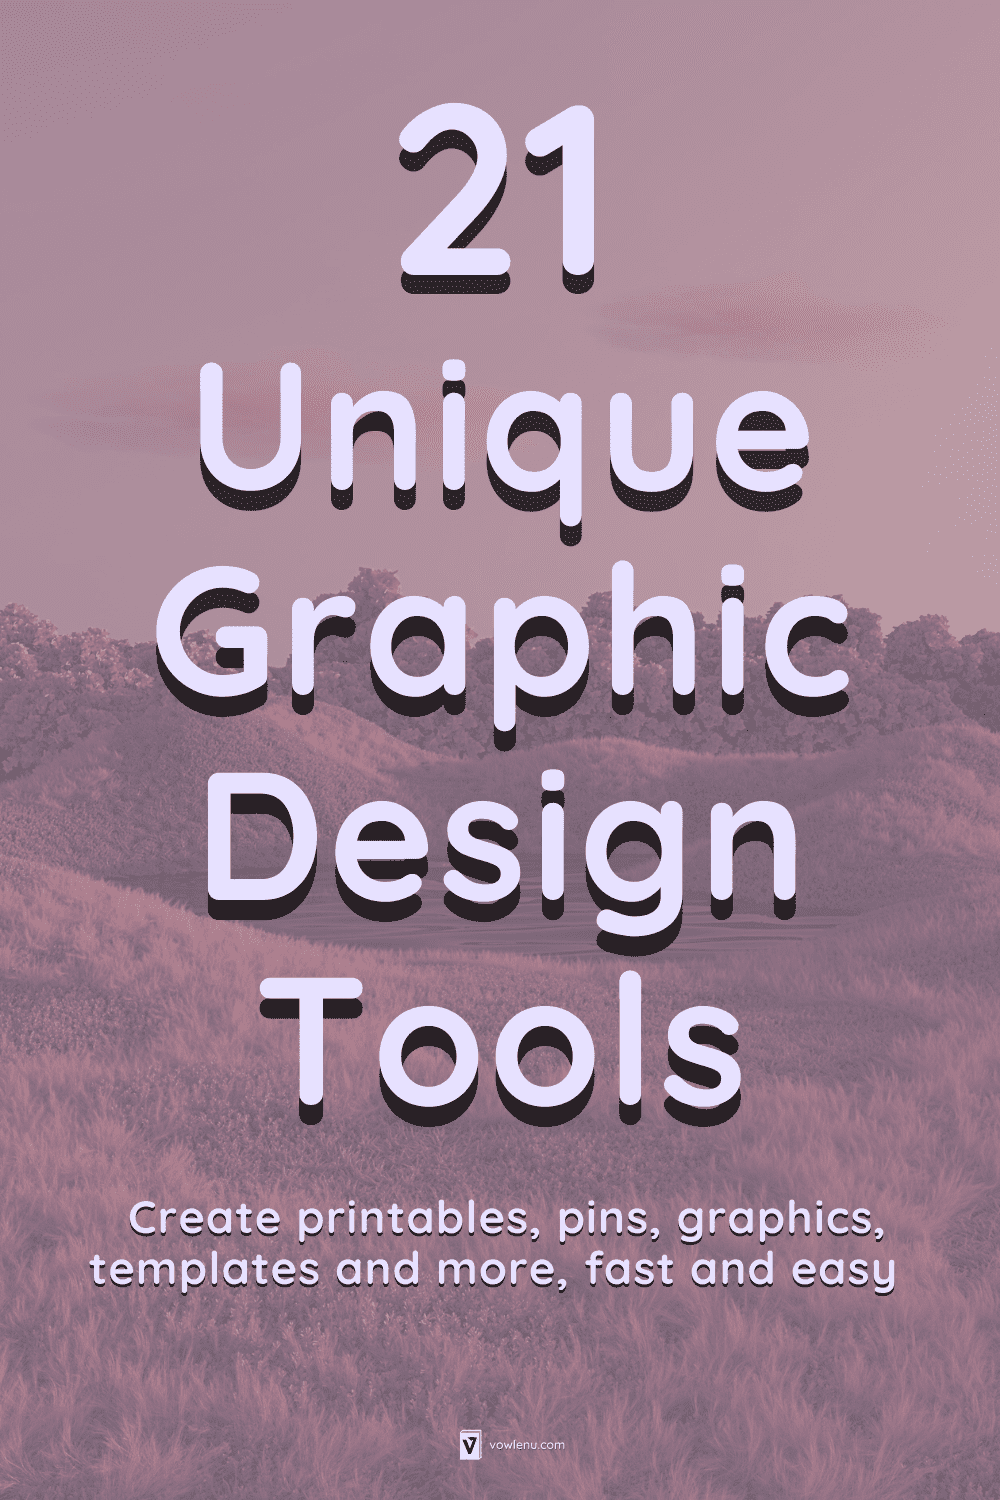 21 Unique Graphic Design Tools  Create printables, pins, graphics, templates and more, fast and easy 